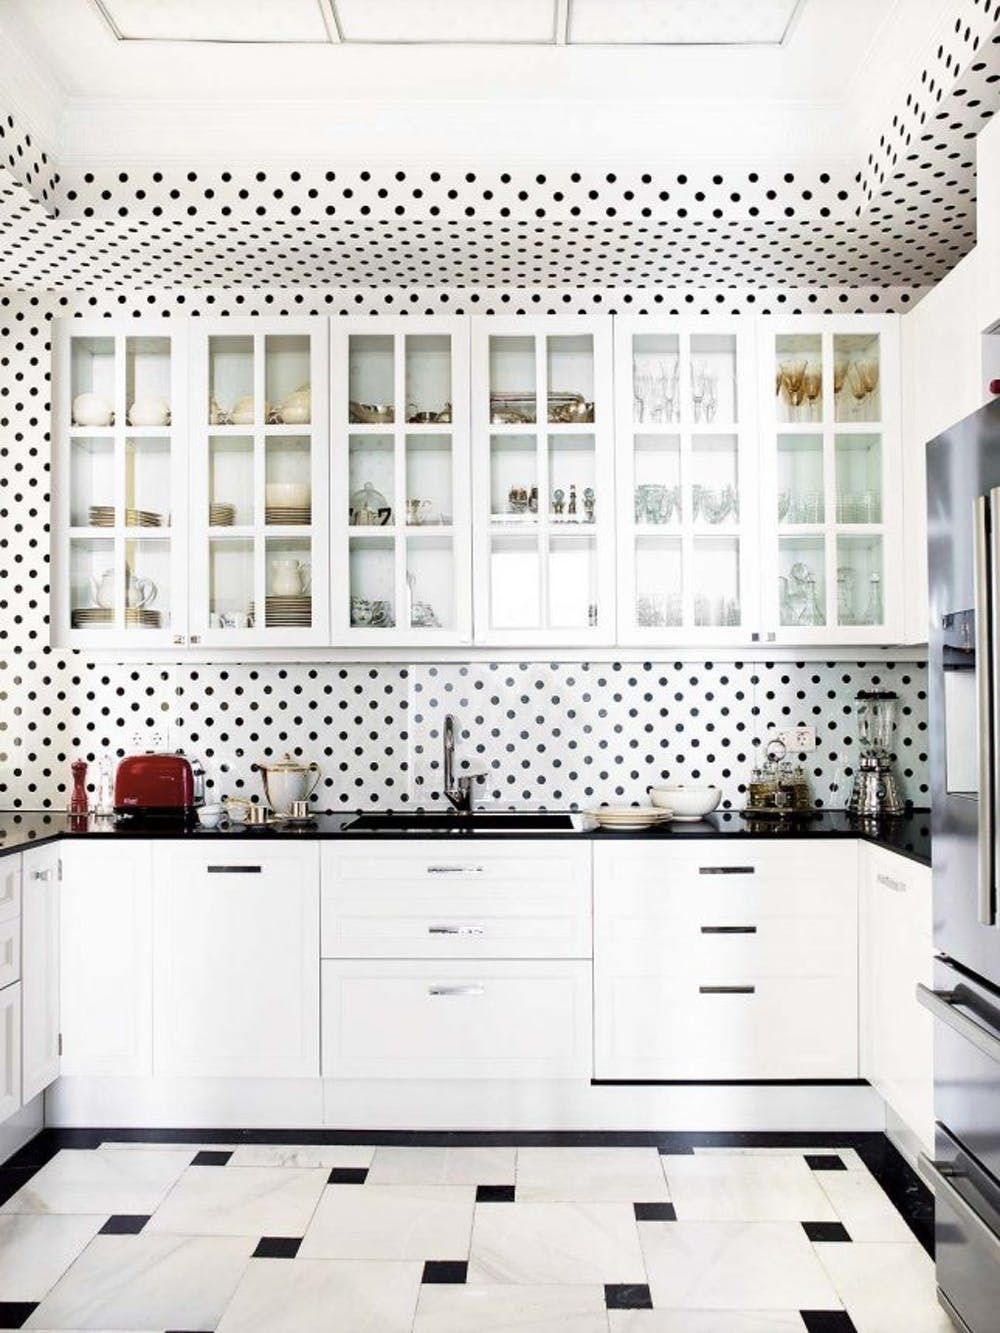 10 Kate Spade New York-Inspired Kitchens You'll Want to Do More Than Cook  In - Brit + Co